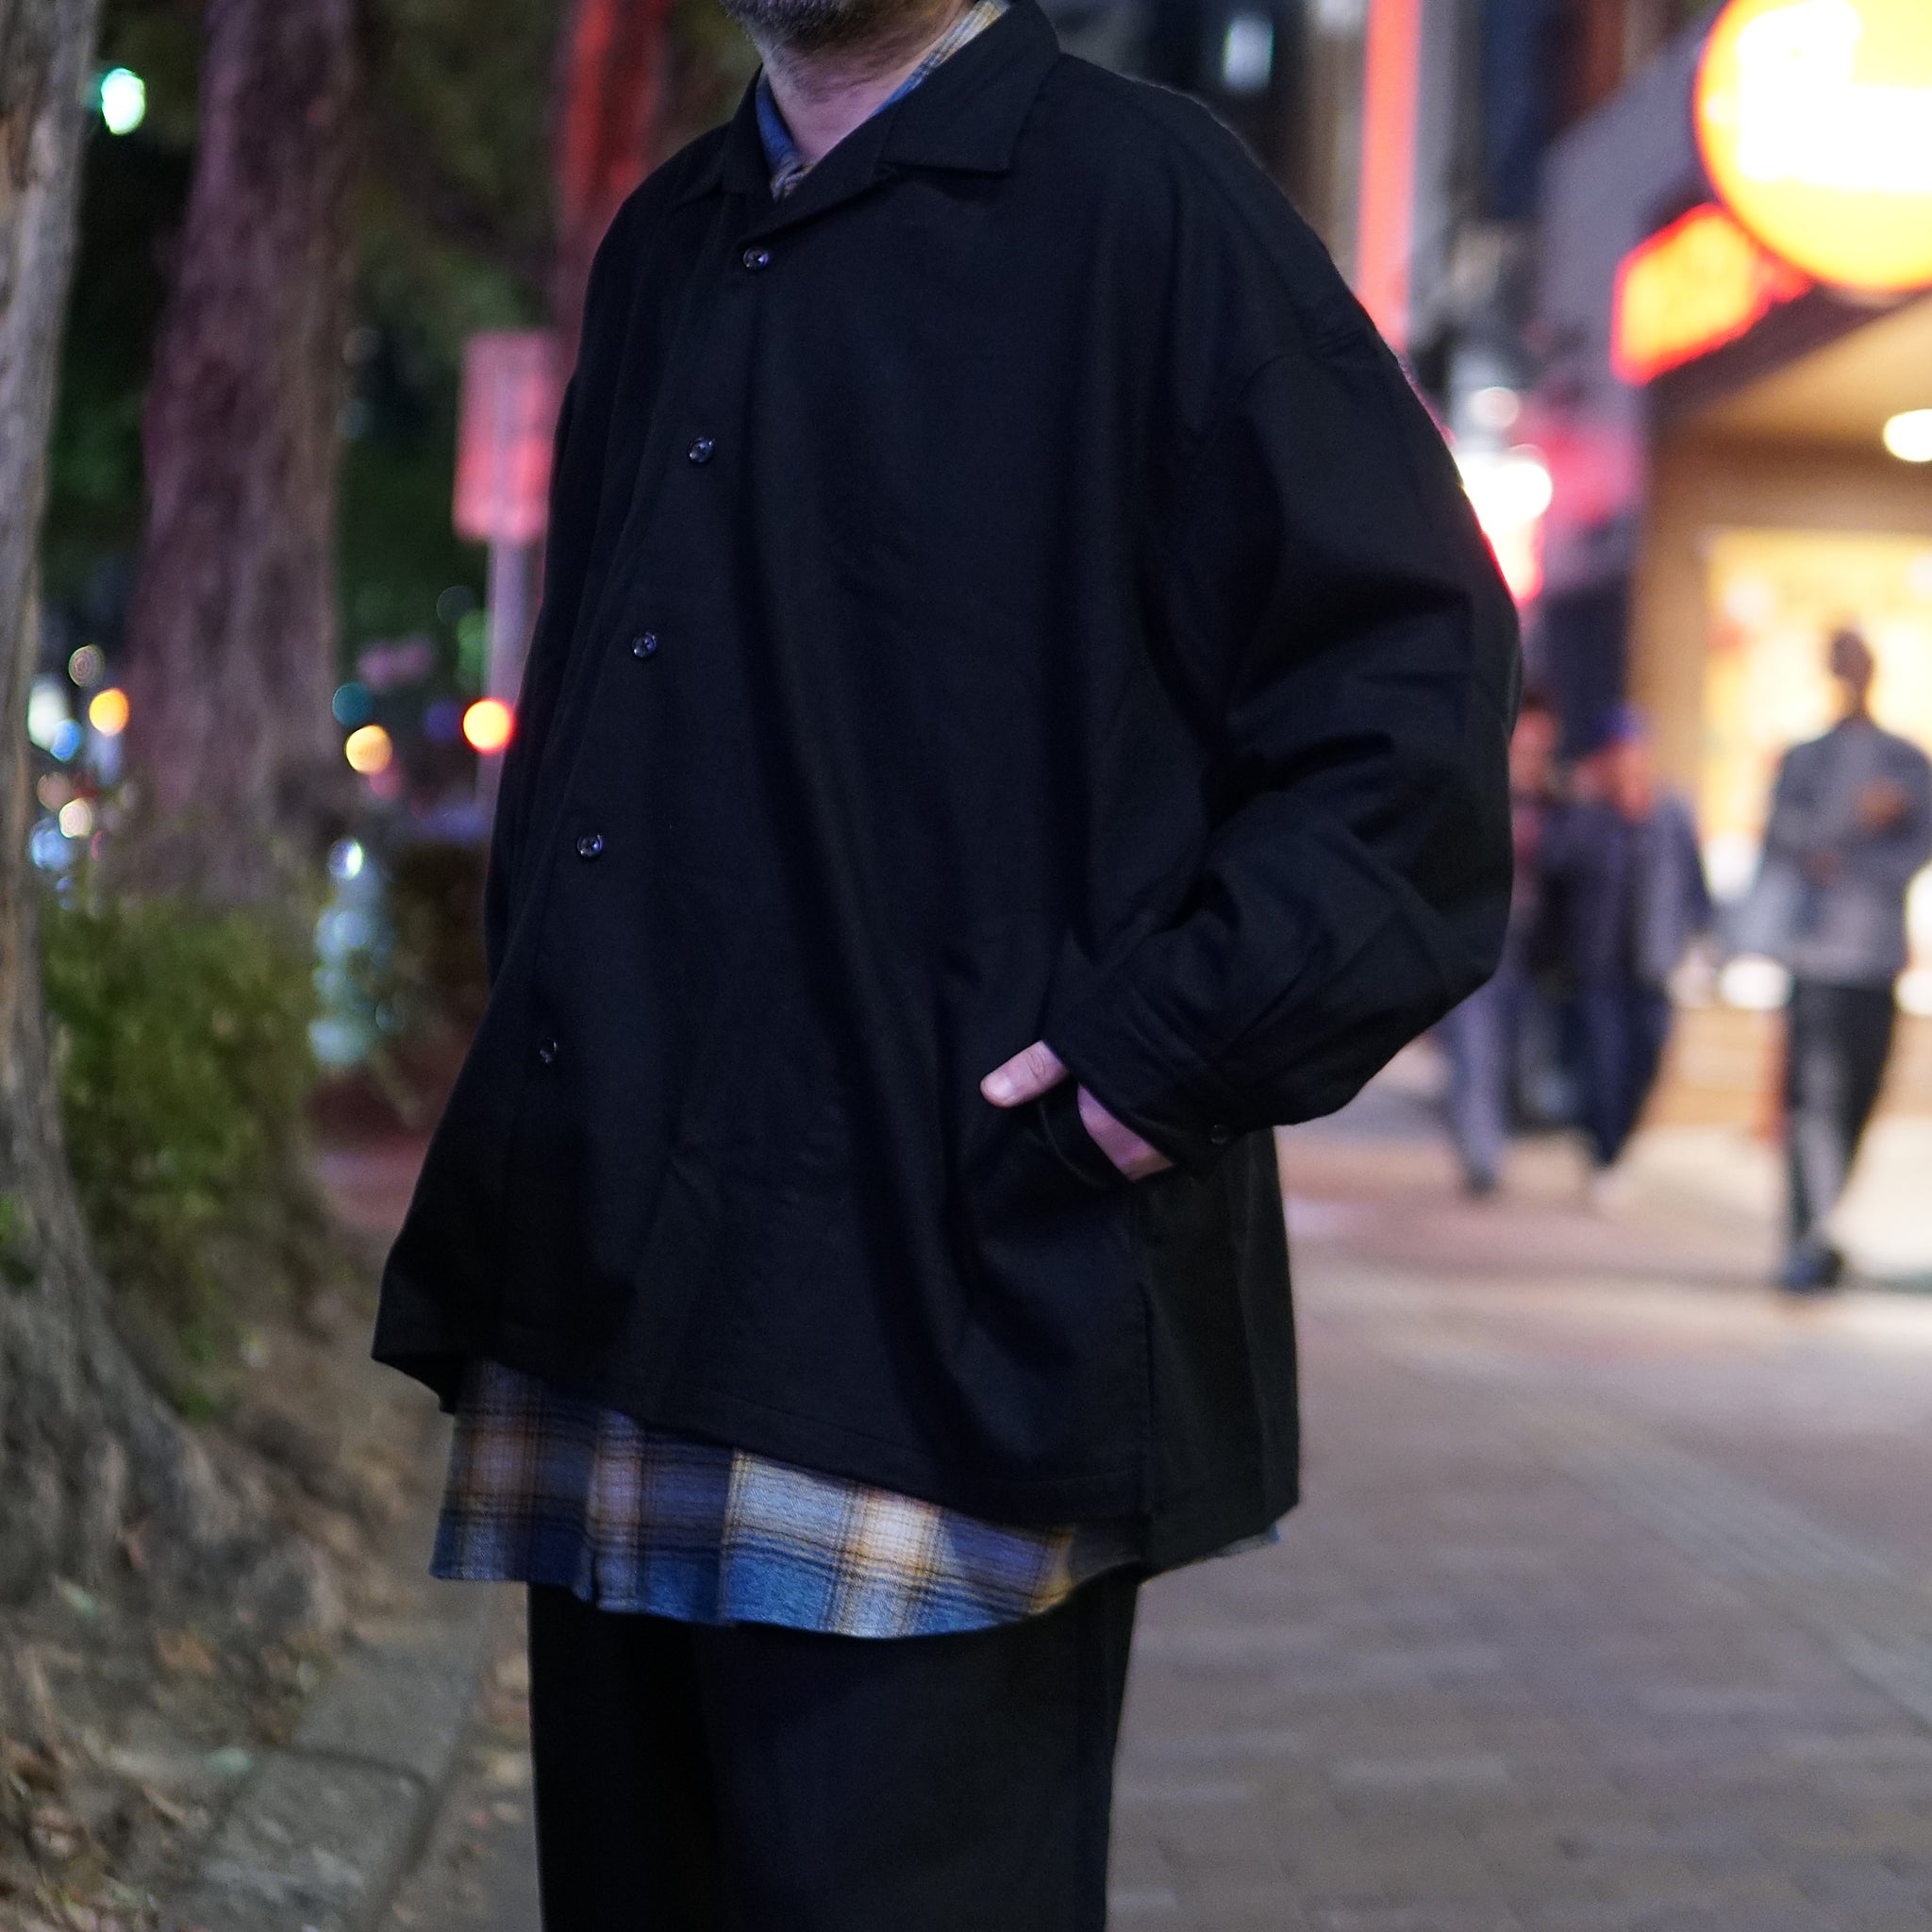 No:2023aw-OP-02 | Name:OPEN COLLAR SHIRT-WOOL FLANNEL | Color:Black【CATTA_カッタ】